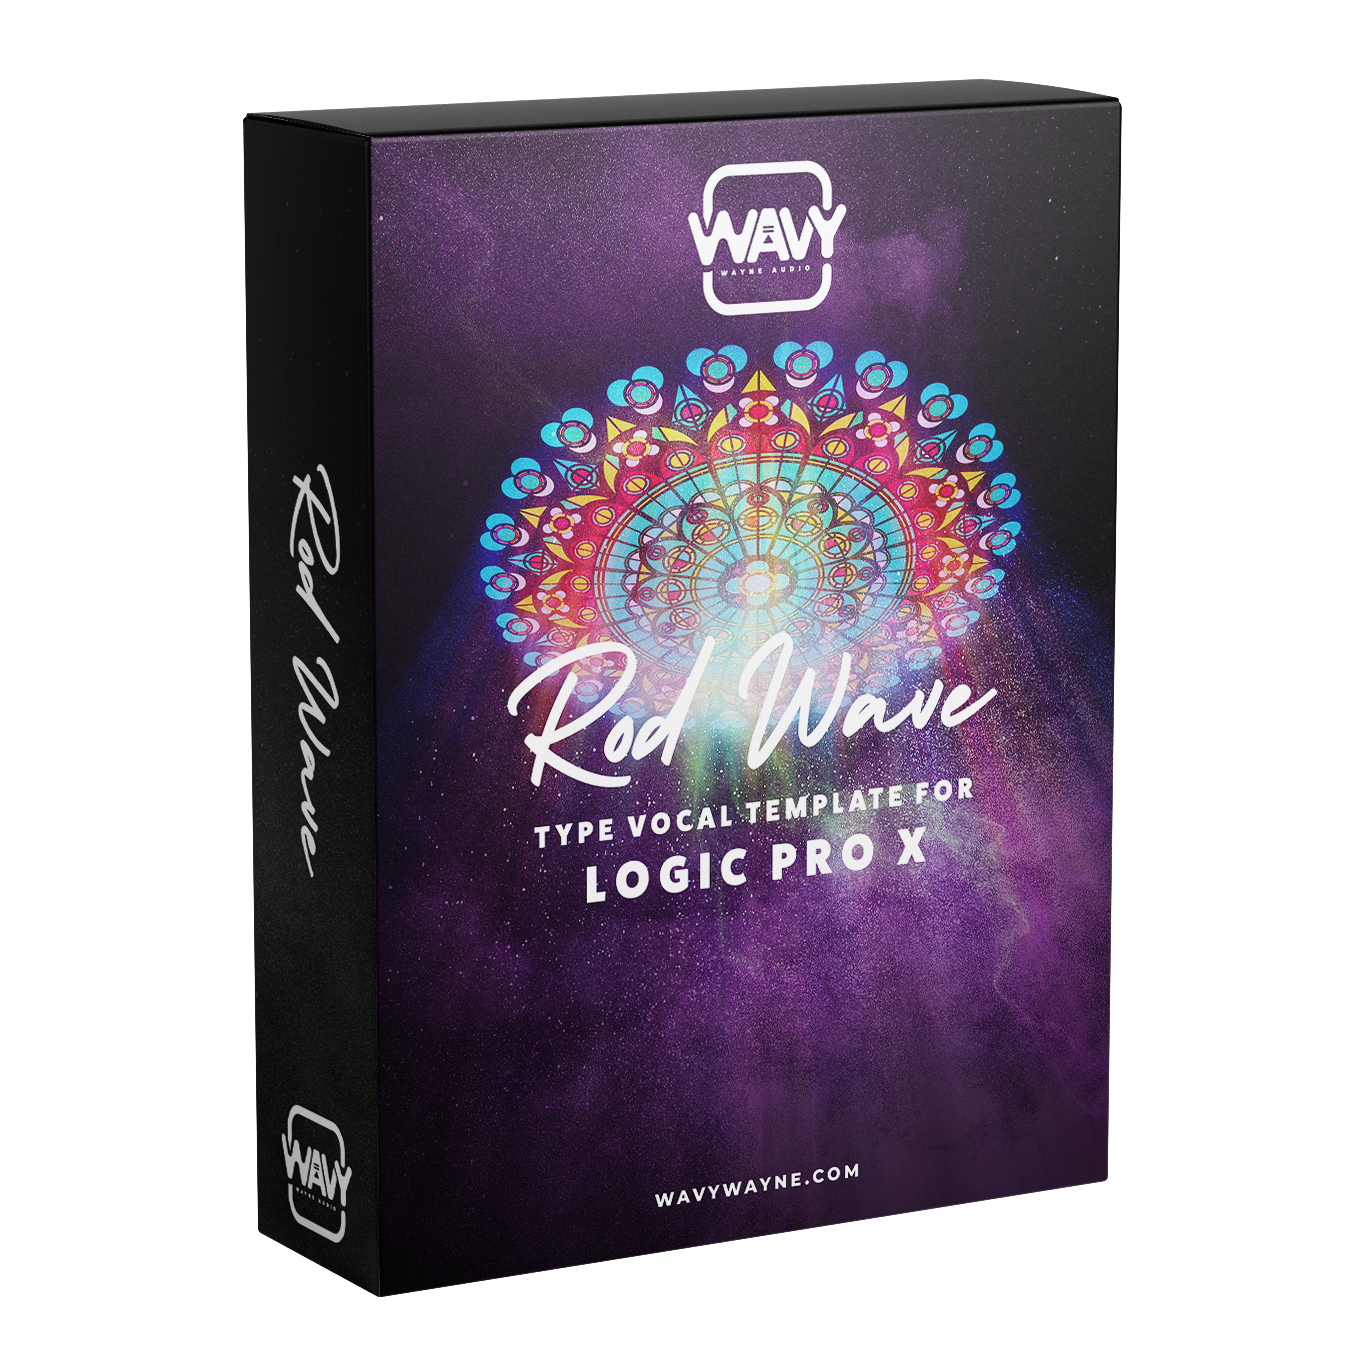 Rod Wave Type Vocal Template for Logic Pro X